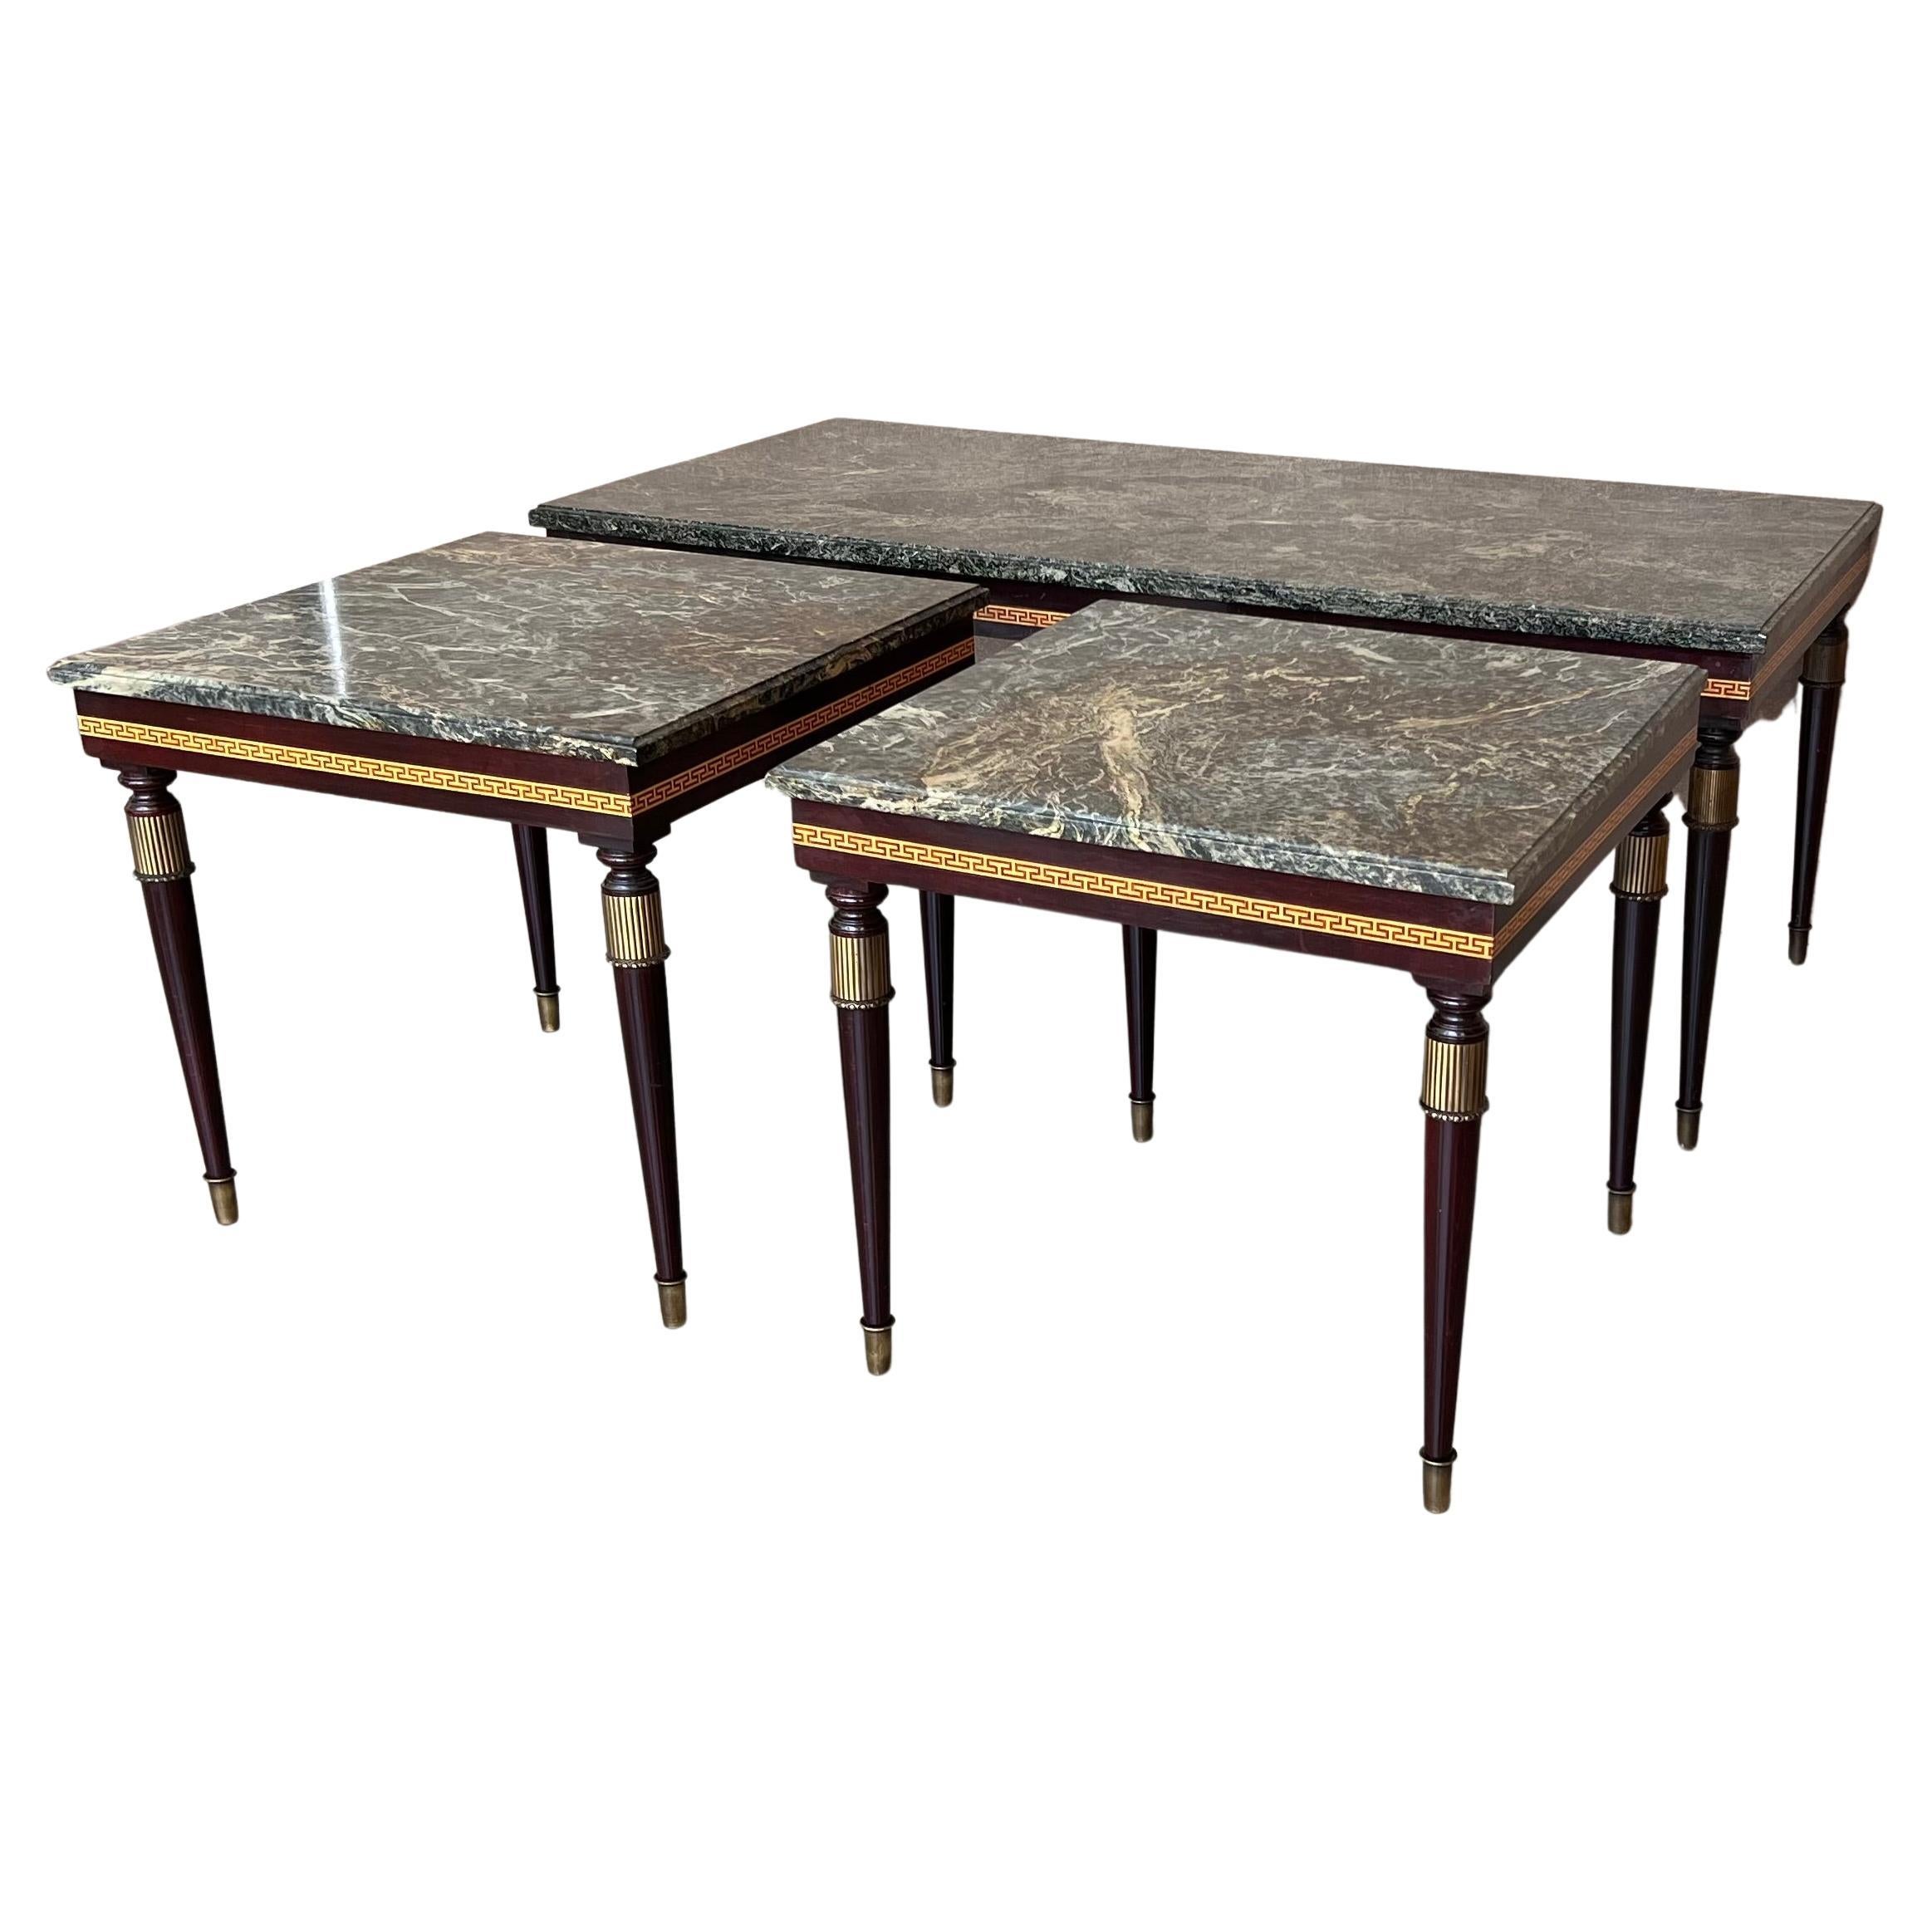 Set of Three Italian Modernist Midcentury Bronze-Mounted Coffee Tables For Sale